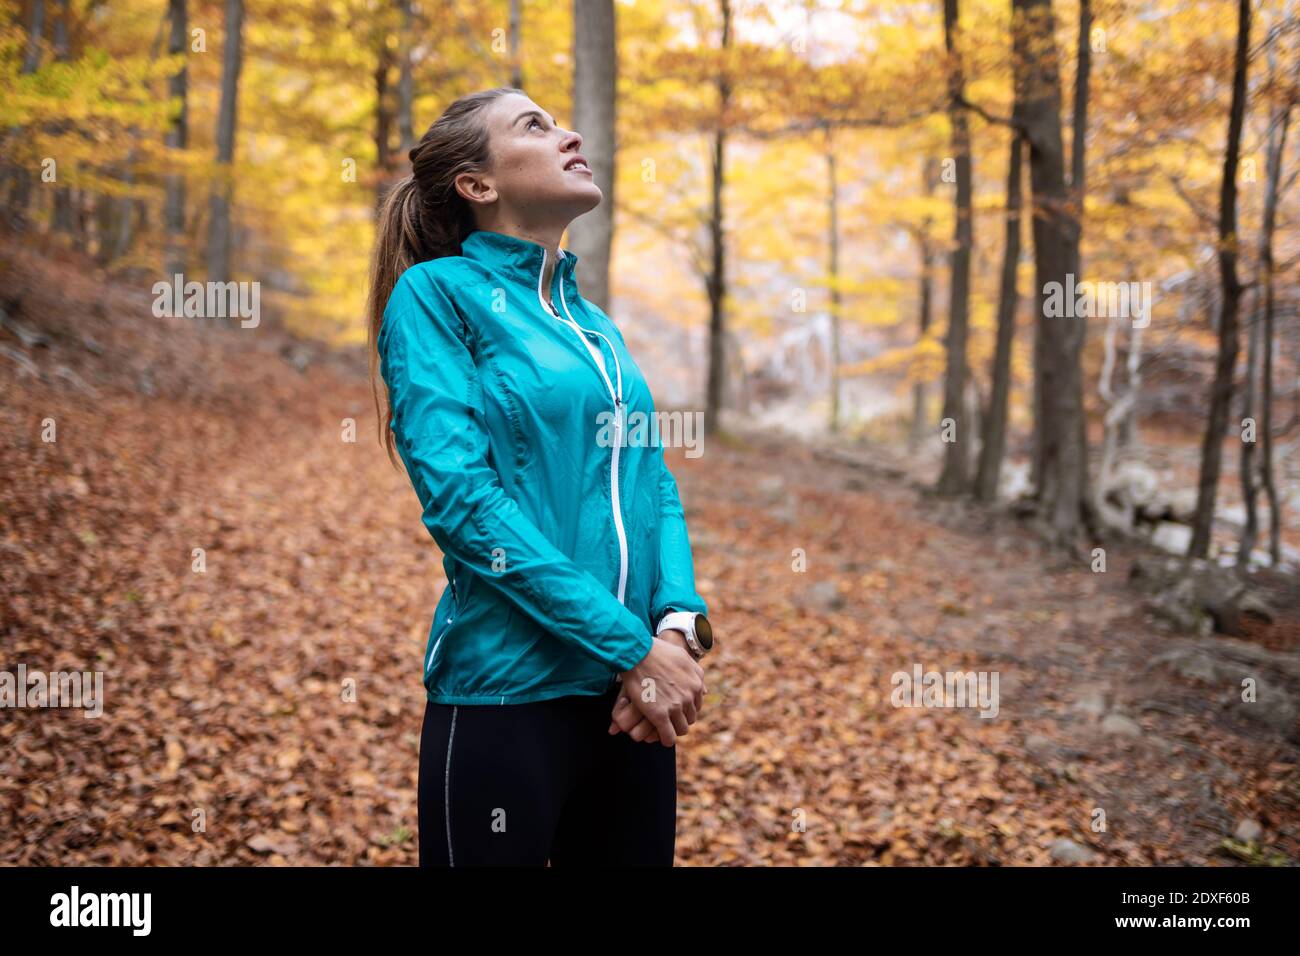 Sportswoman looking up while standing in forest Stock Photo